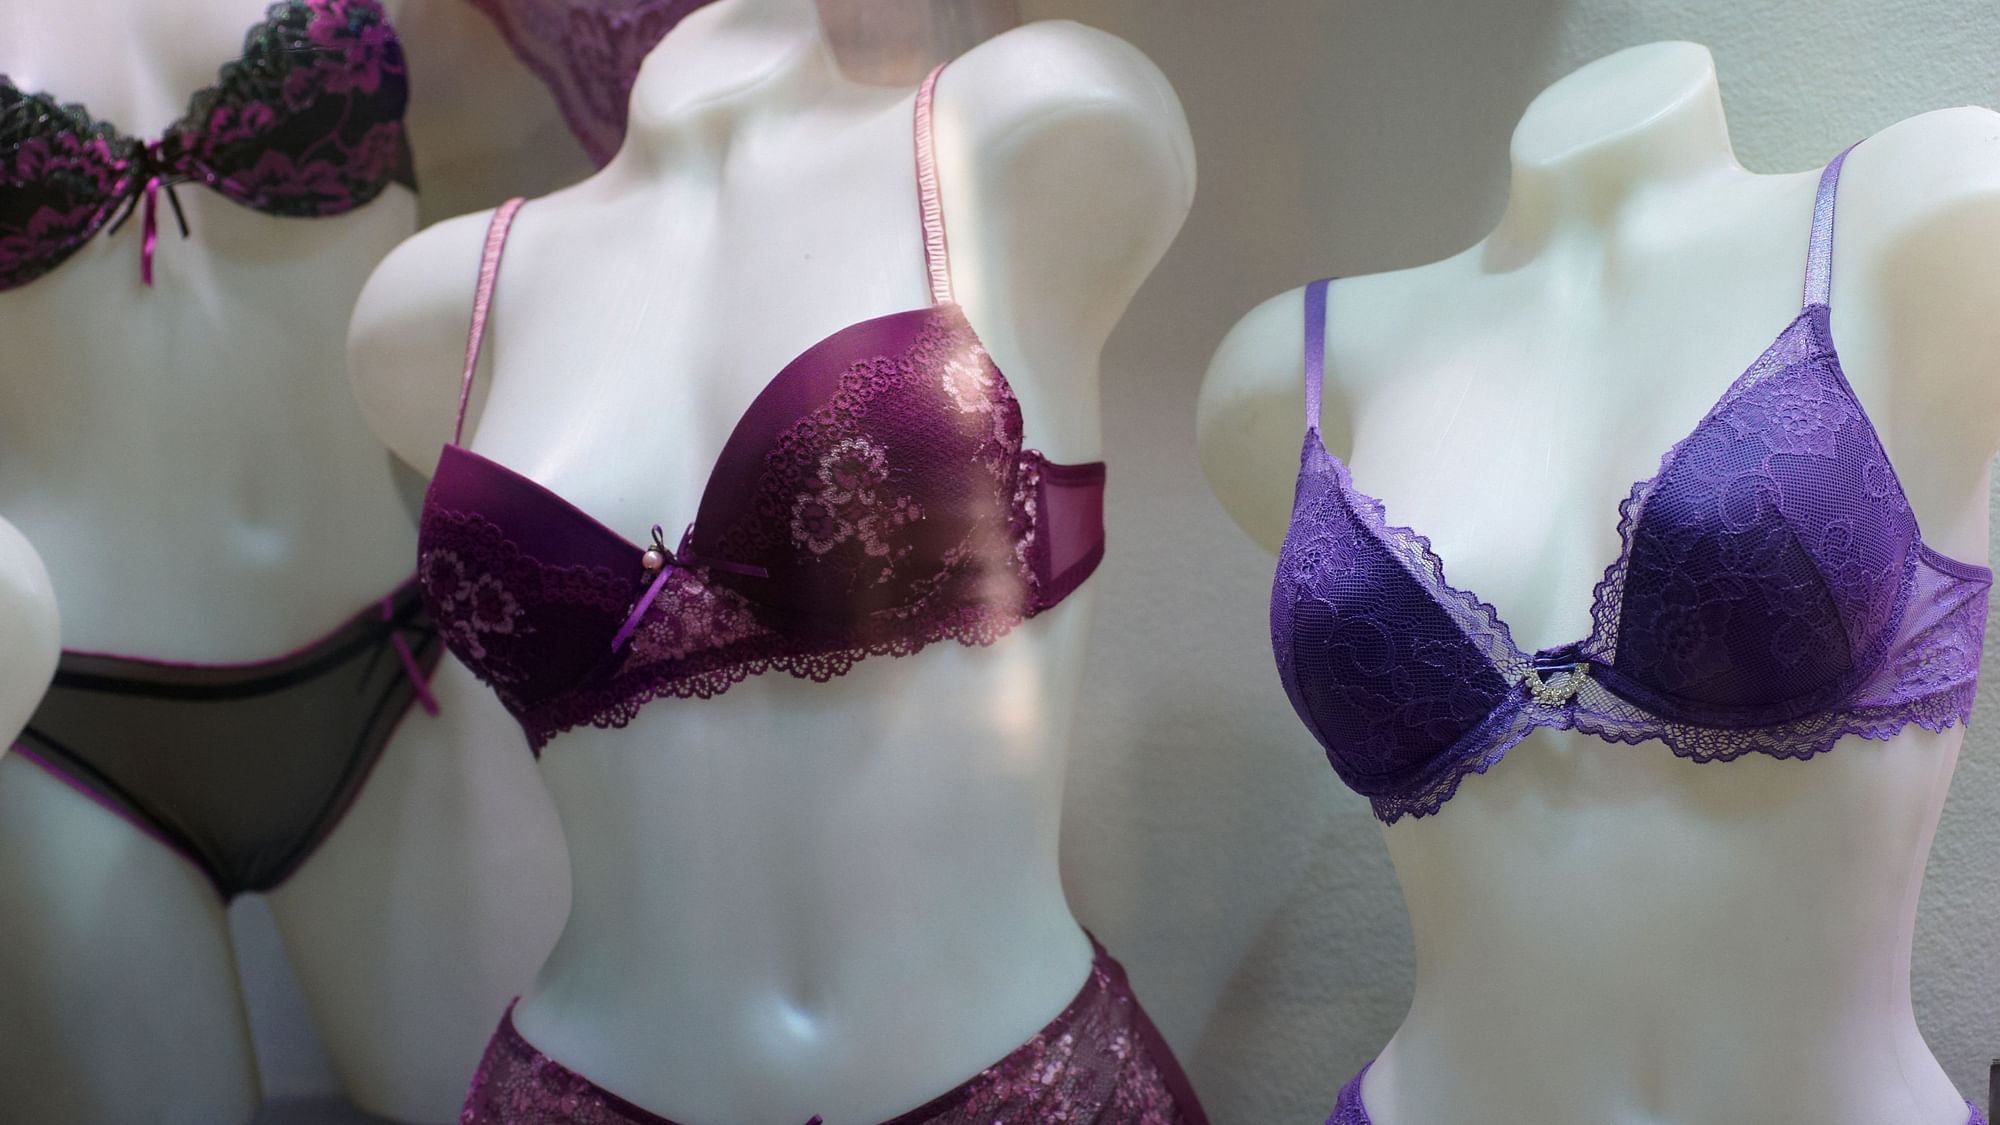 Shiv Sena Wants Illegal Lingerie Mannequins To Be Removed In Mumbai